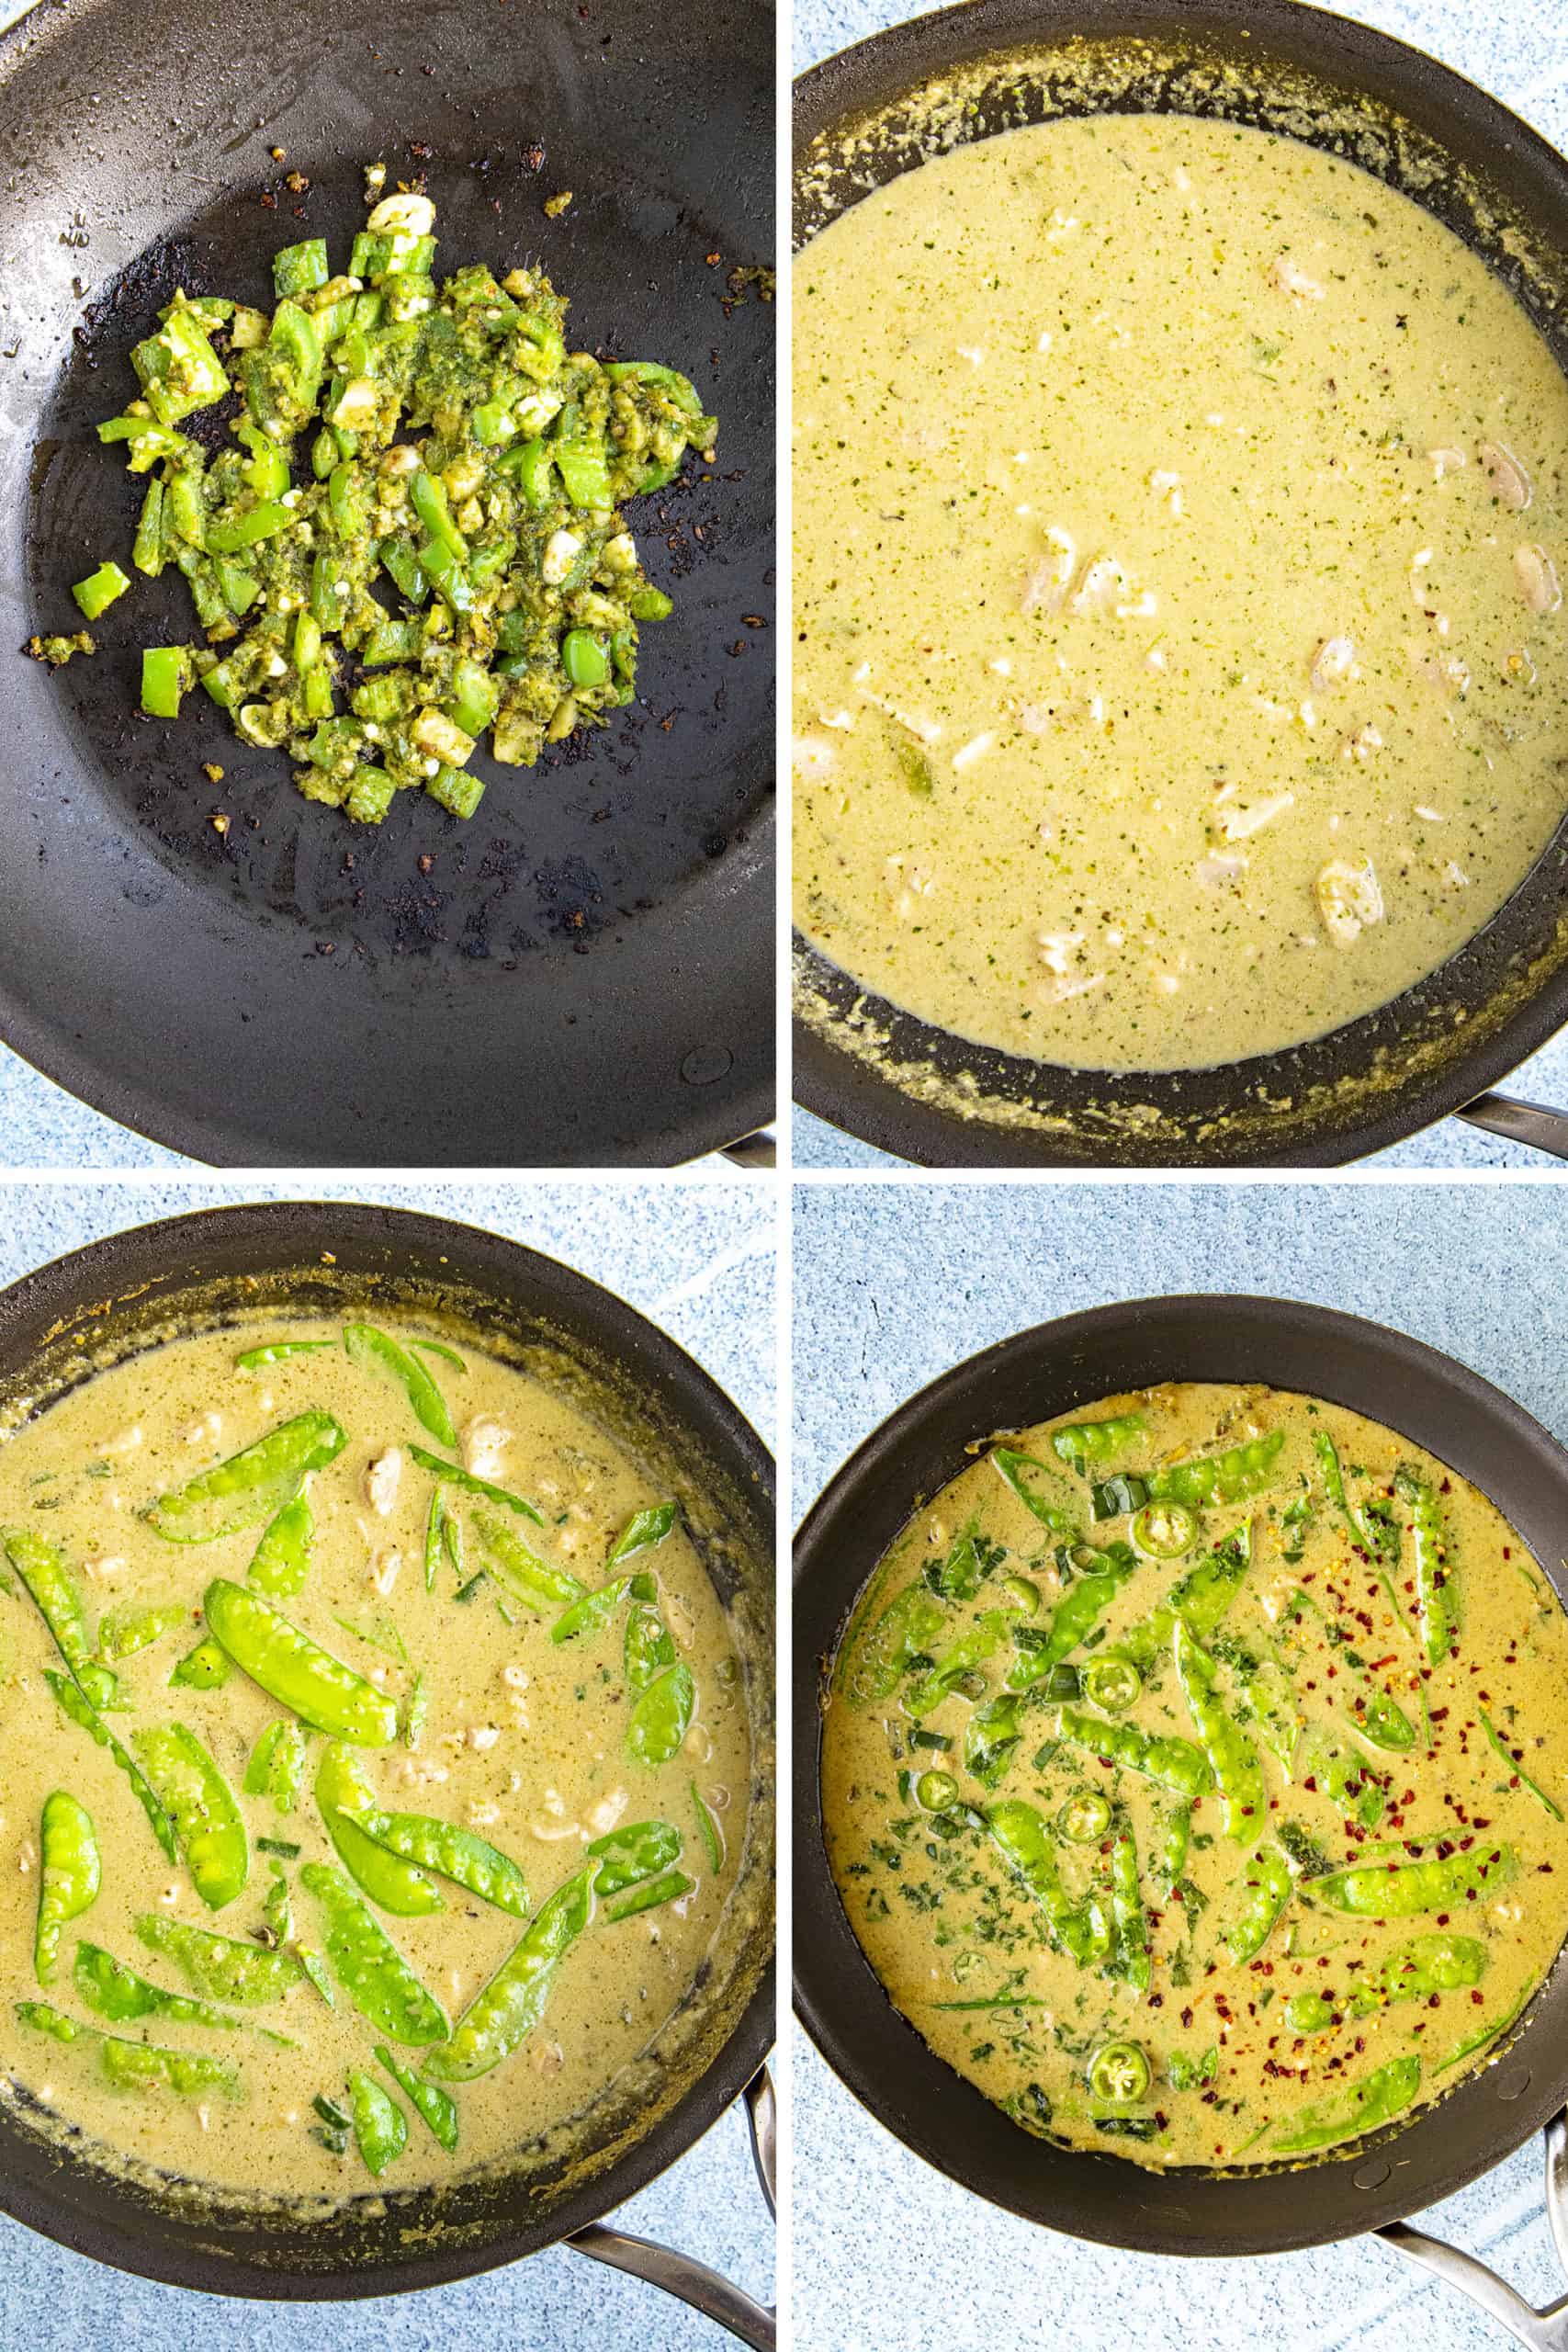 Steps to making green curry